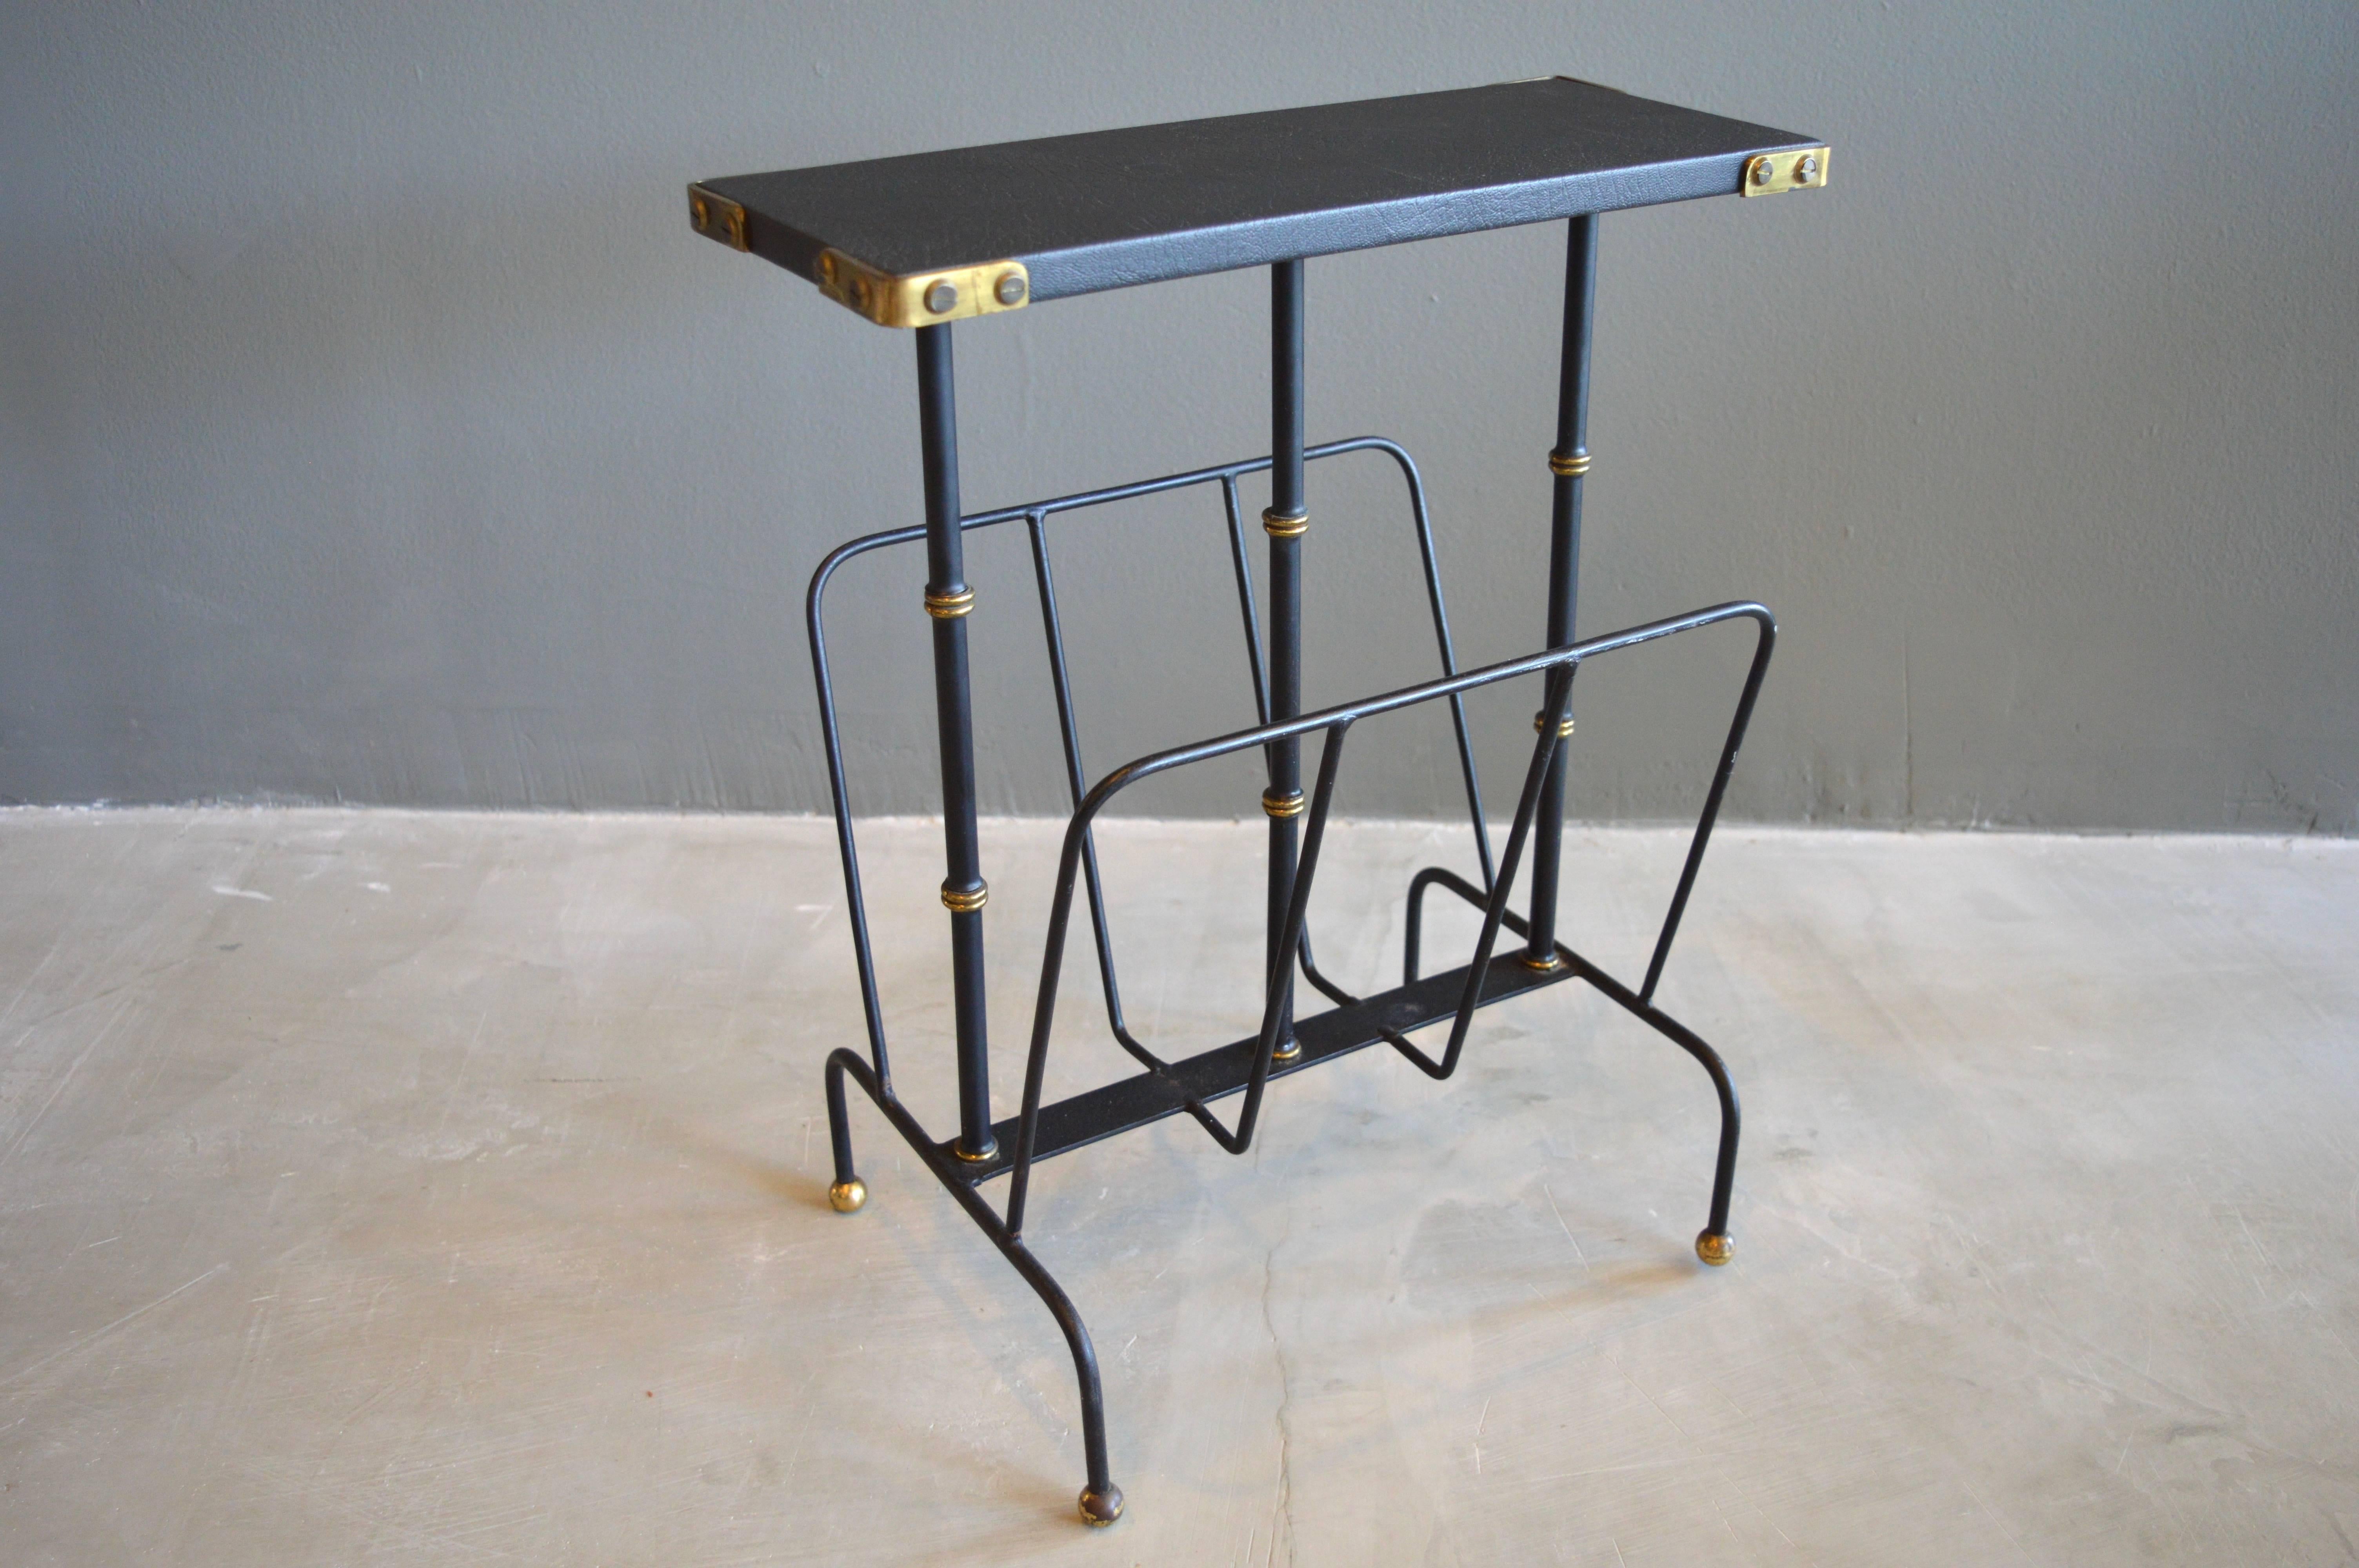 Handsome side table/magazine rack by French designer Jacques Adnet. Original black leather with brass detailing. Excellent vintage condition.